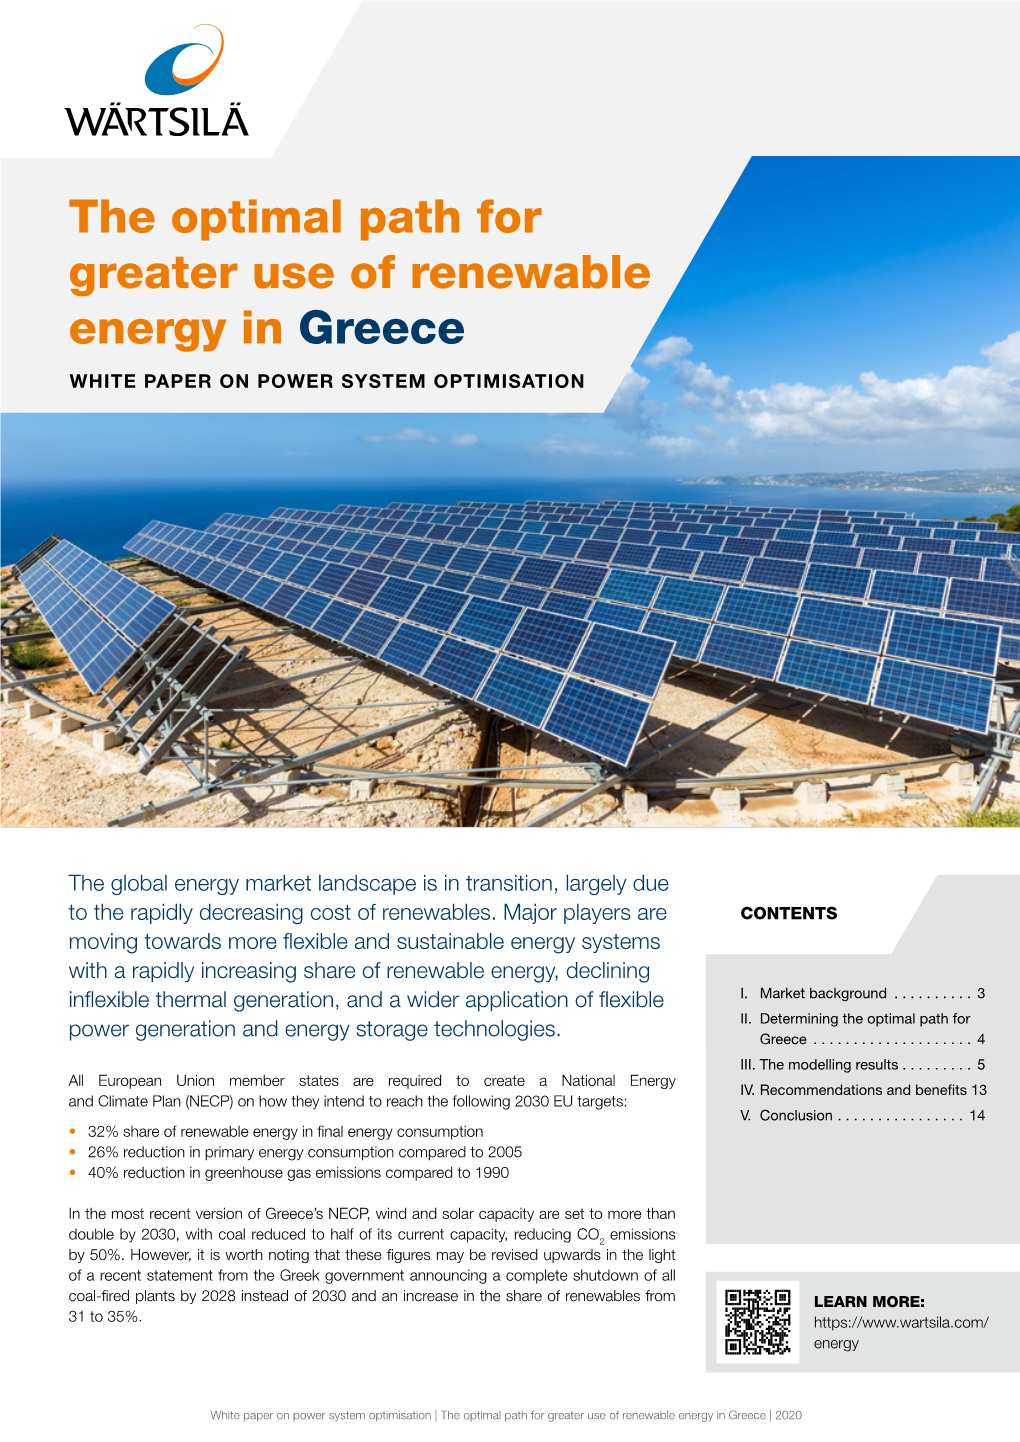 The Optimal Path for Greater Use of Renewable Energy in Greece WHITE PAPER on POWER SYSTEM OPTIMISATION